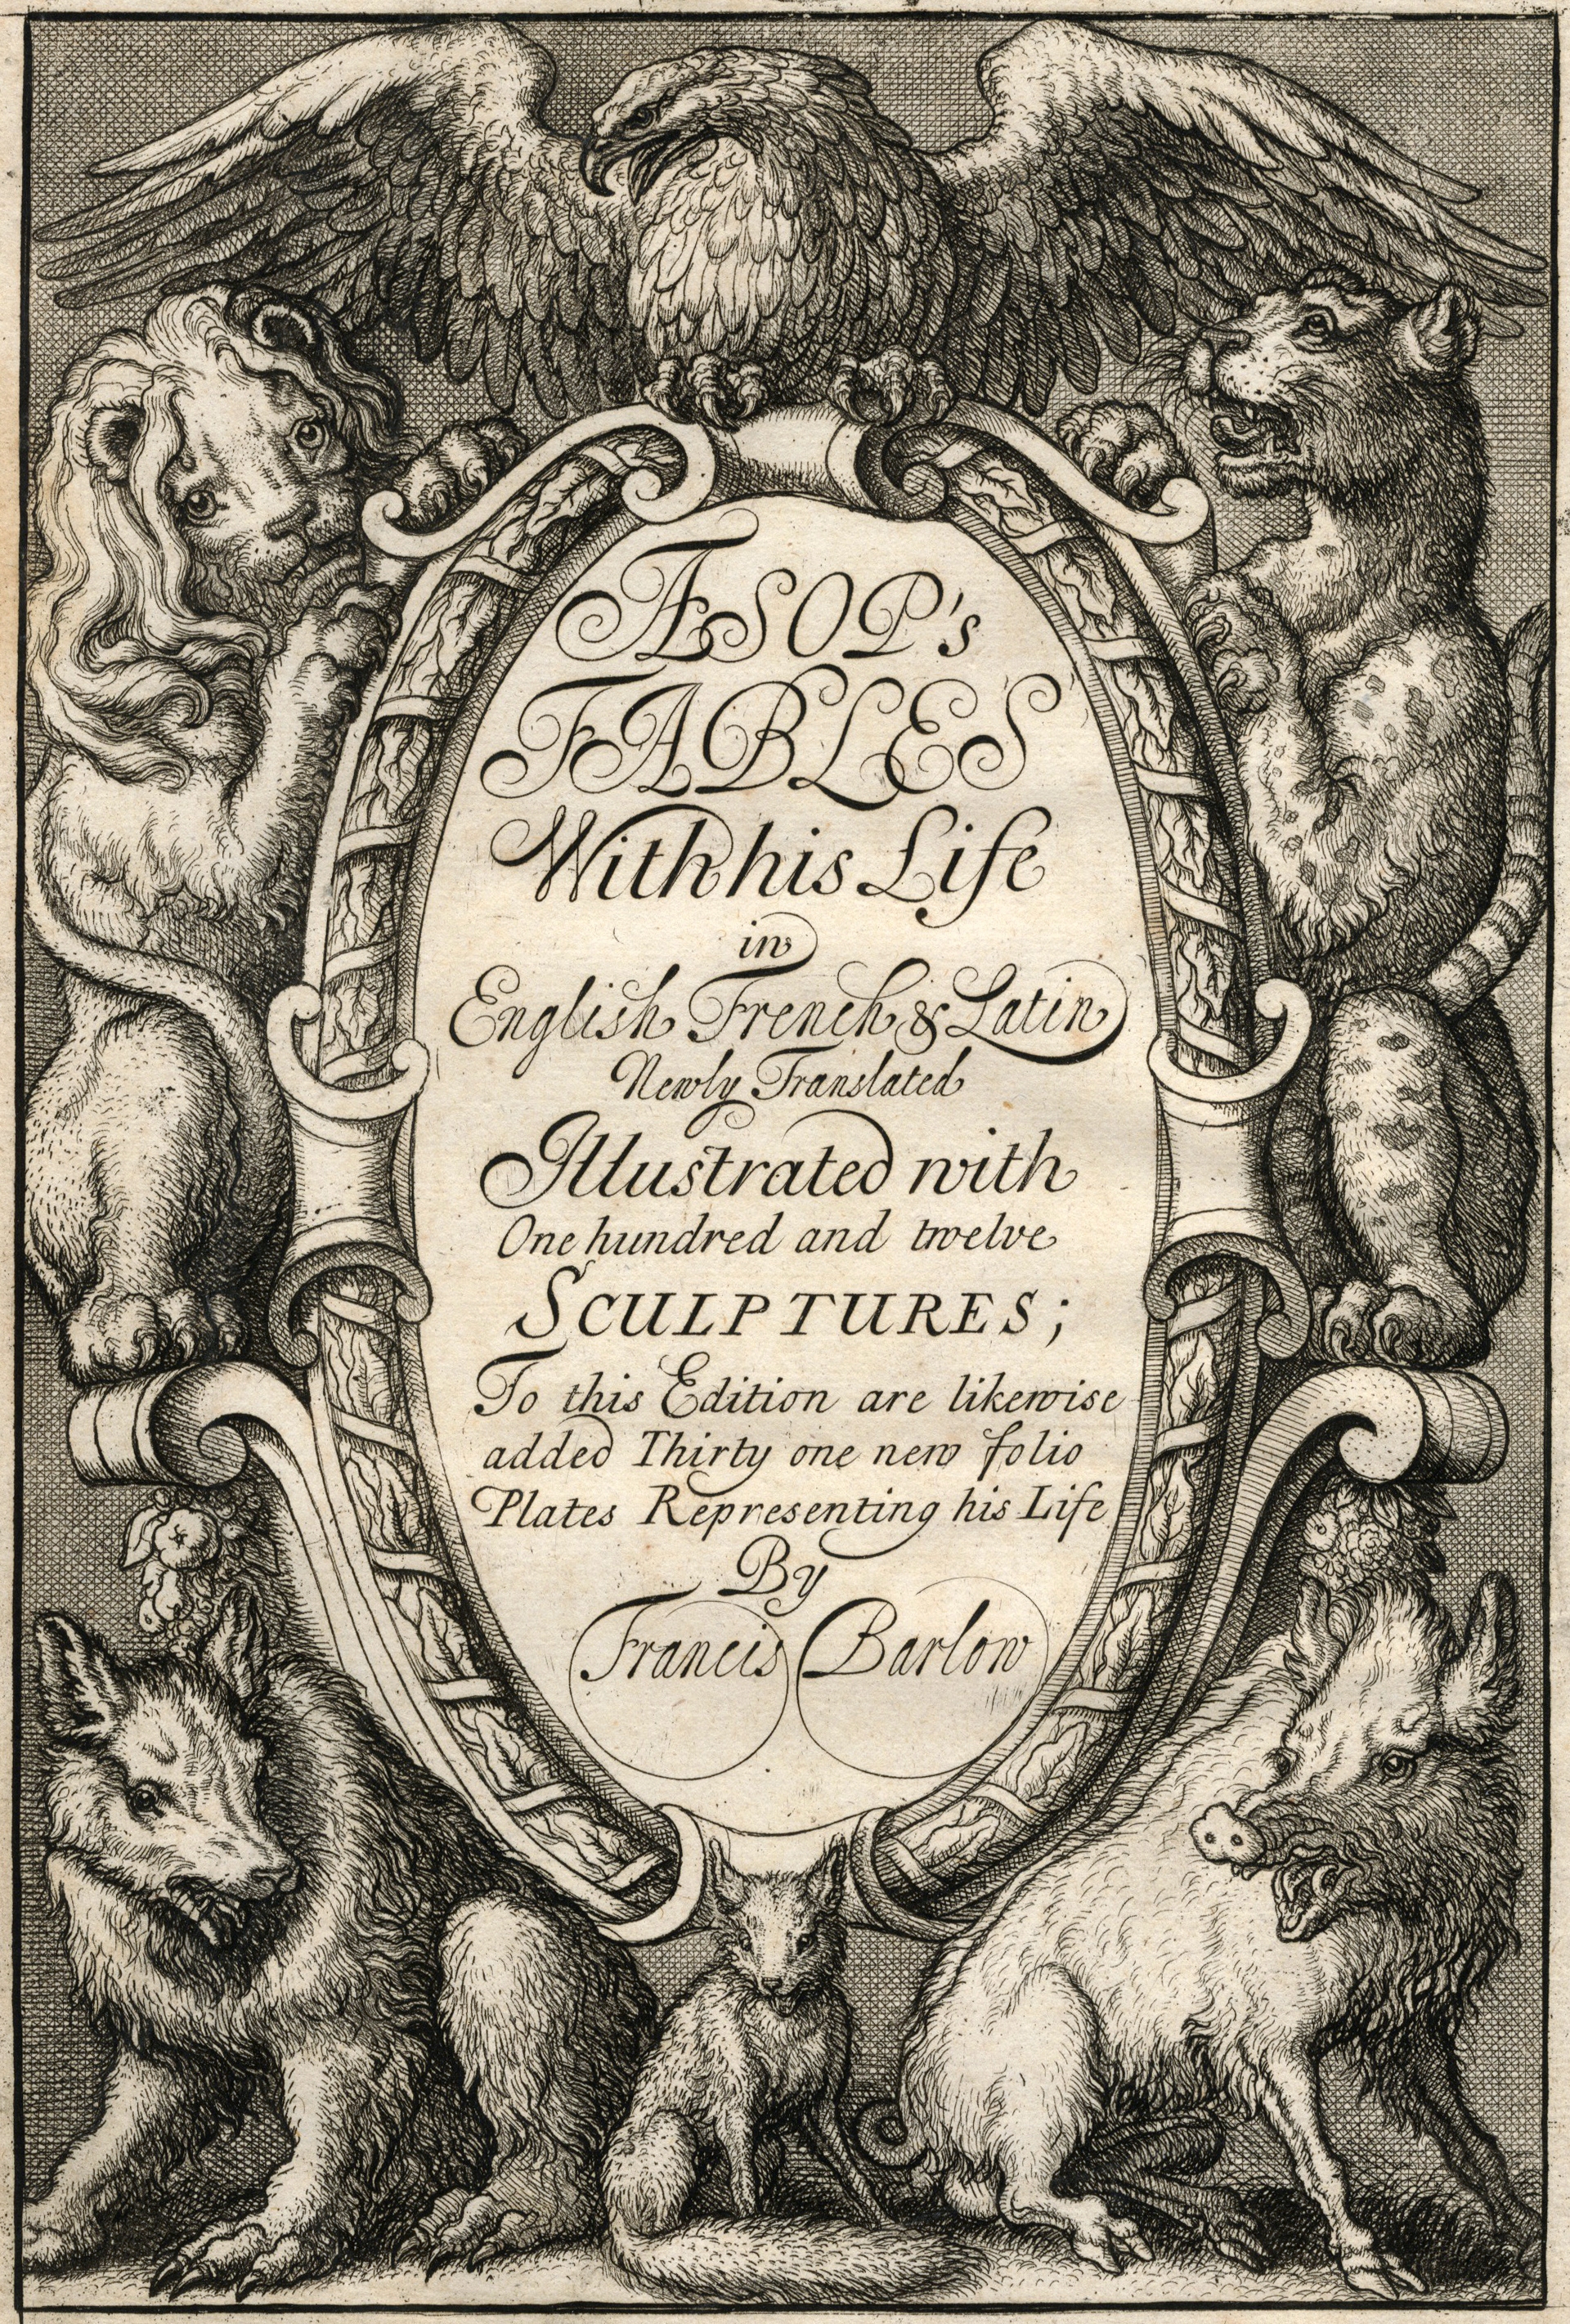 AESOP Fables with His Life: in English, French and Latin, H. Hills Jun., for Francis Barlow, 1687